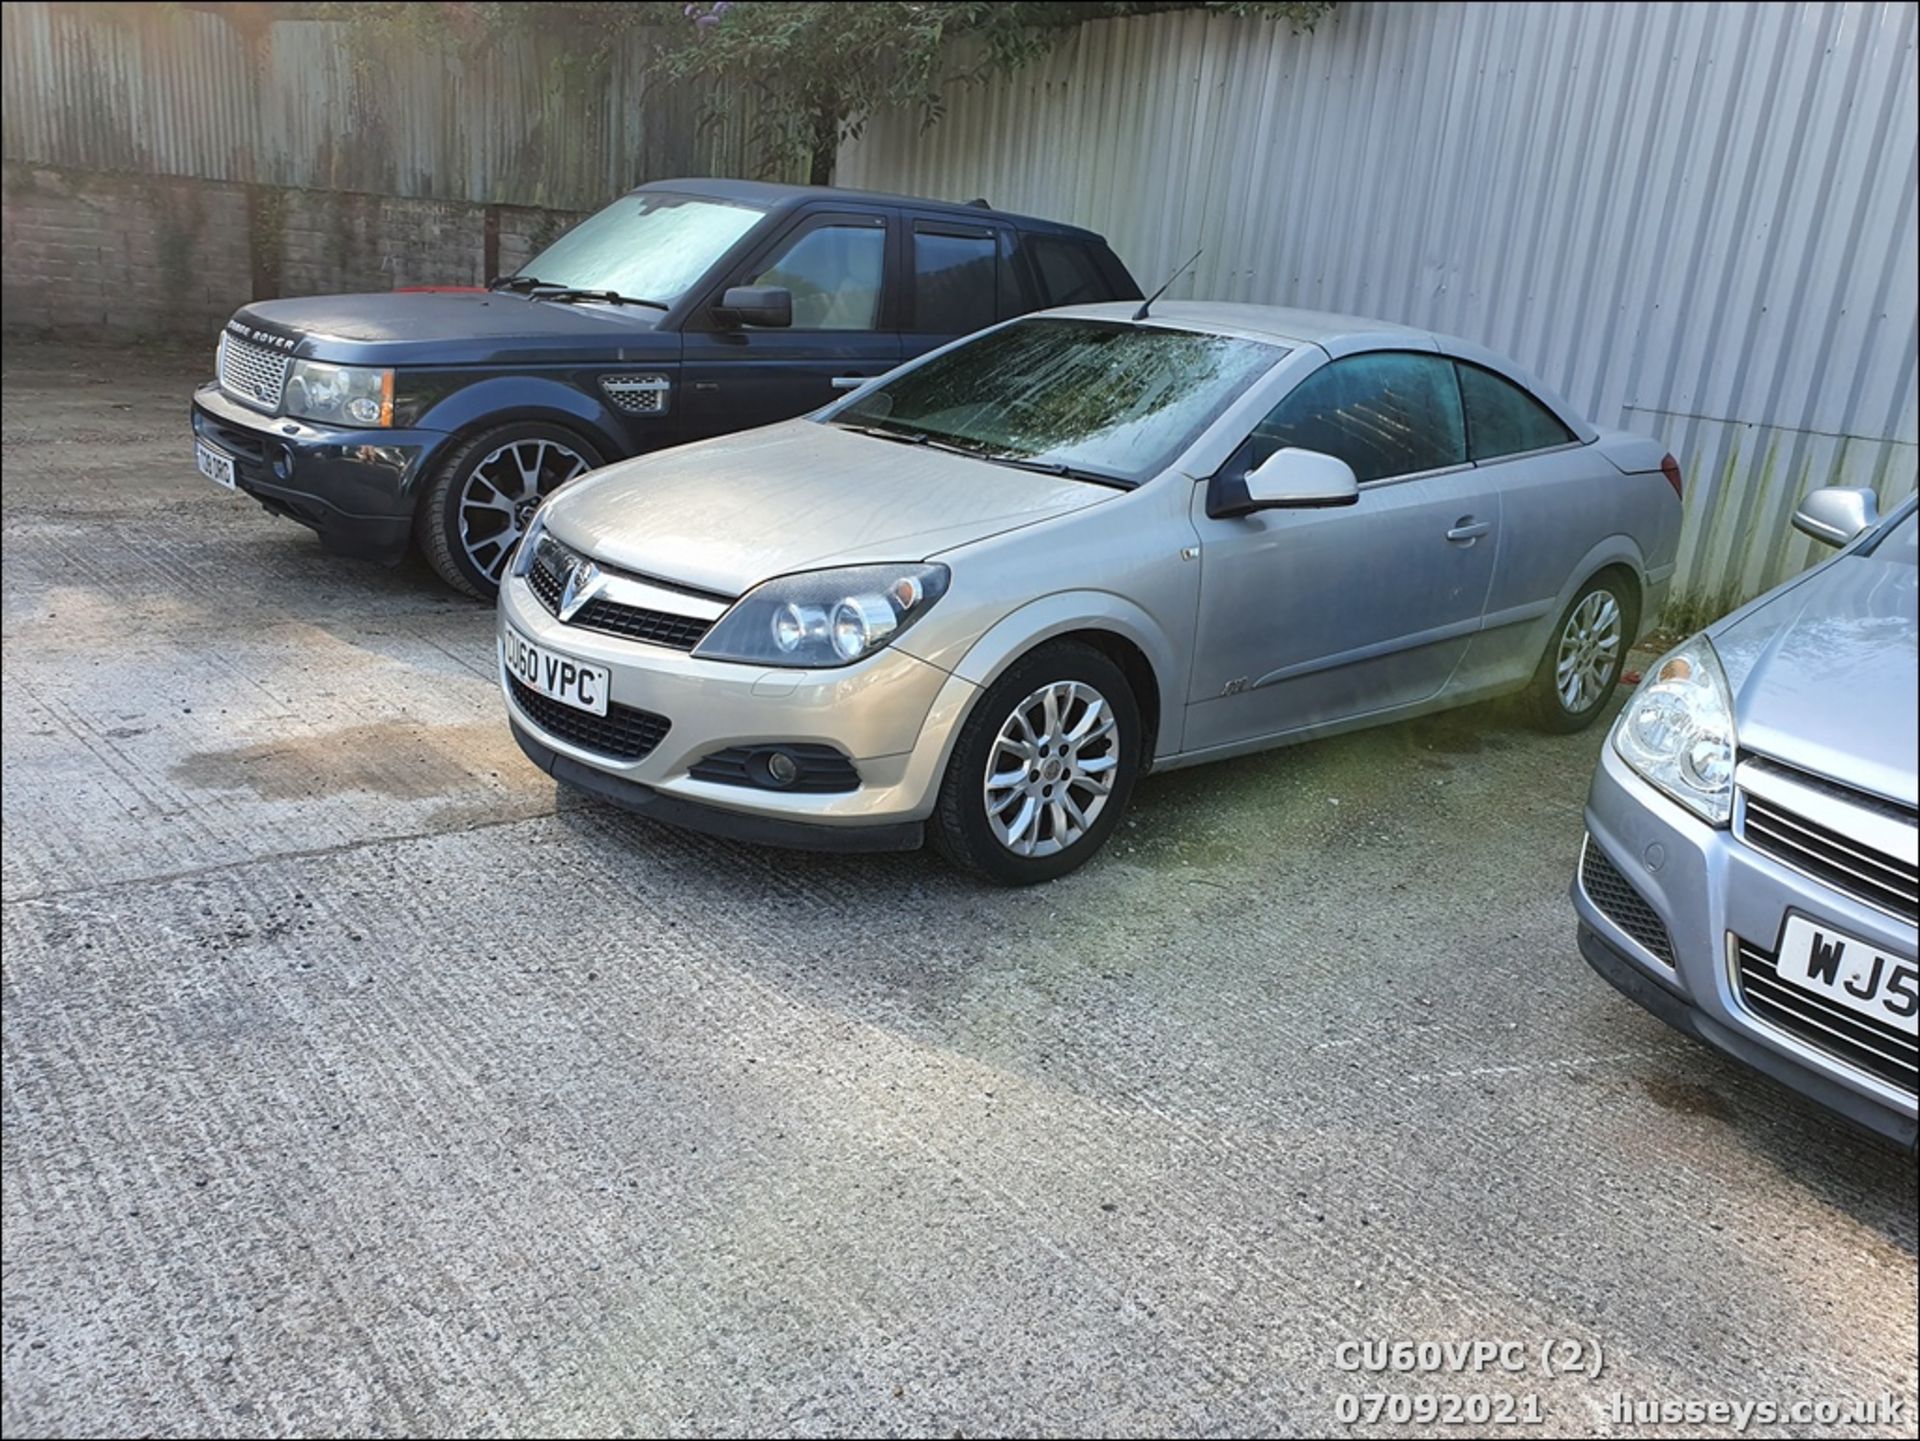 11/60 VAUXHALL ASTRA SPORT - 1796cc 2dr Convertible (Silver, 123k) - Image 2 of 12